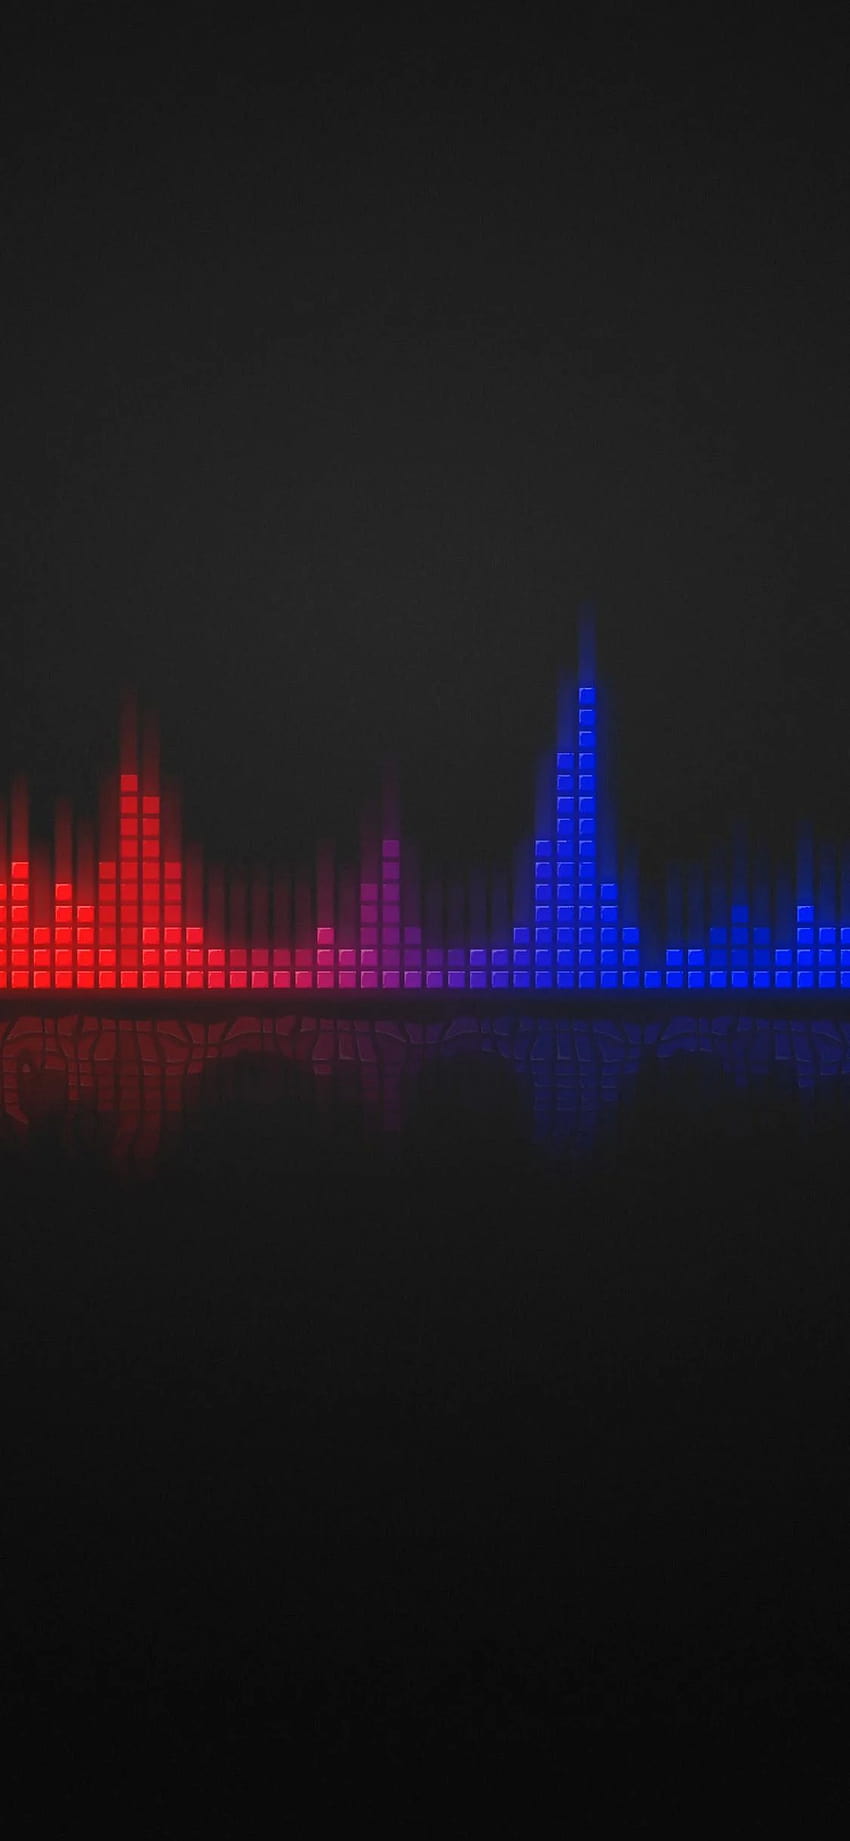 Music Live For Android, graphic equalizer iphone HD phone wallpaper